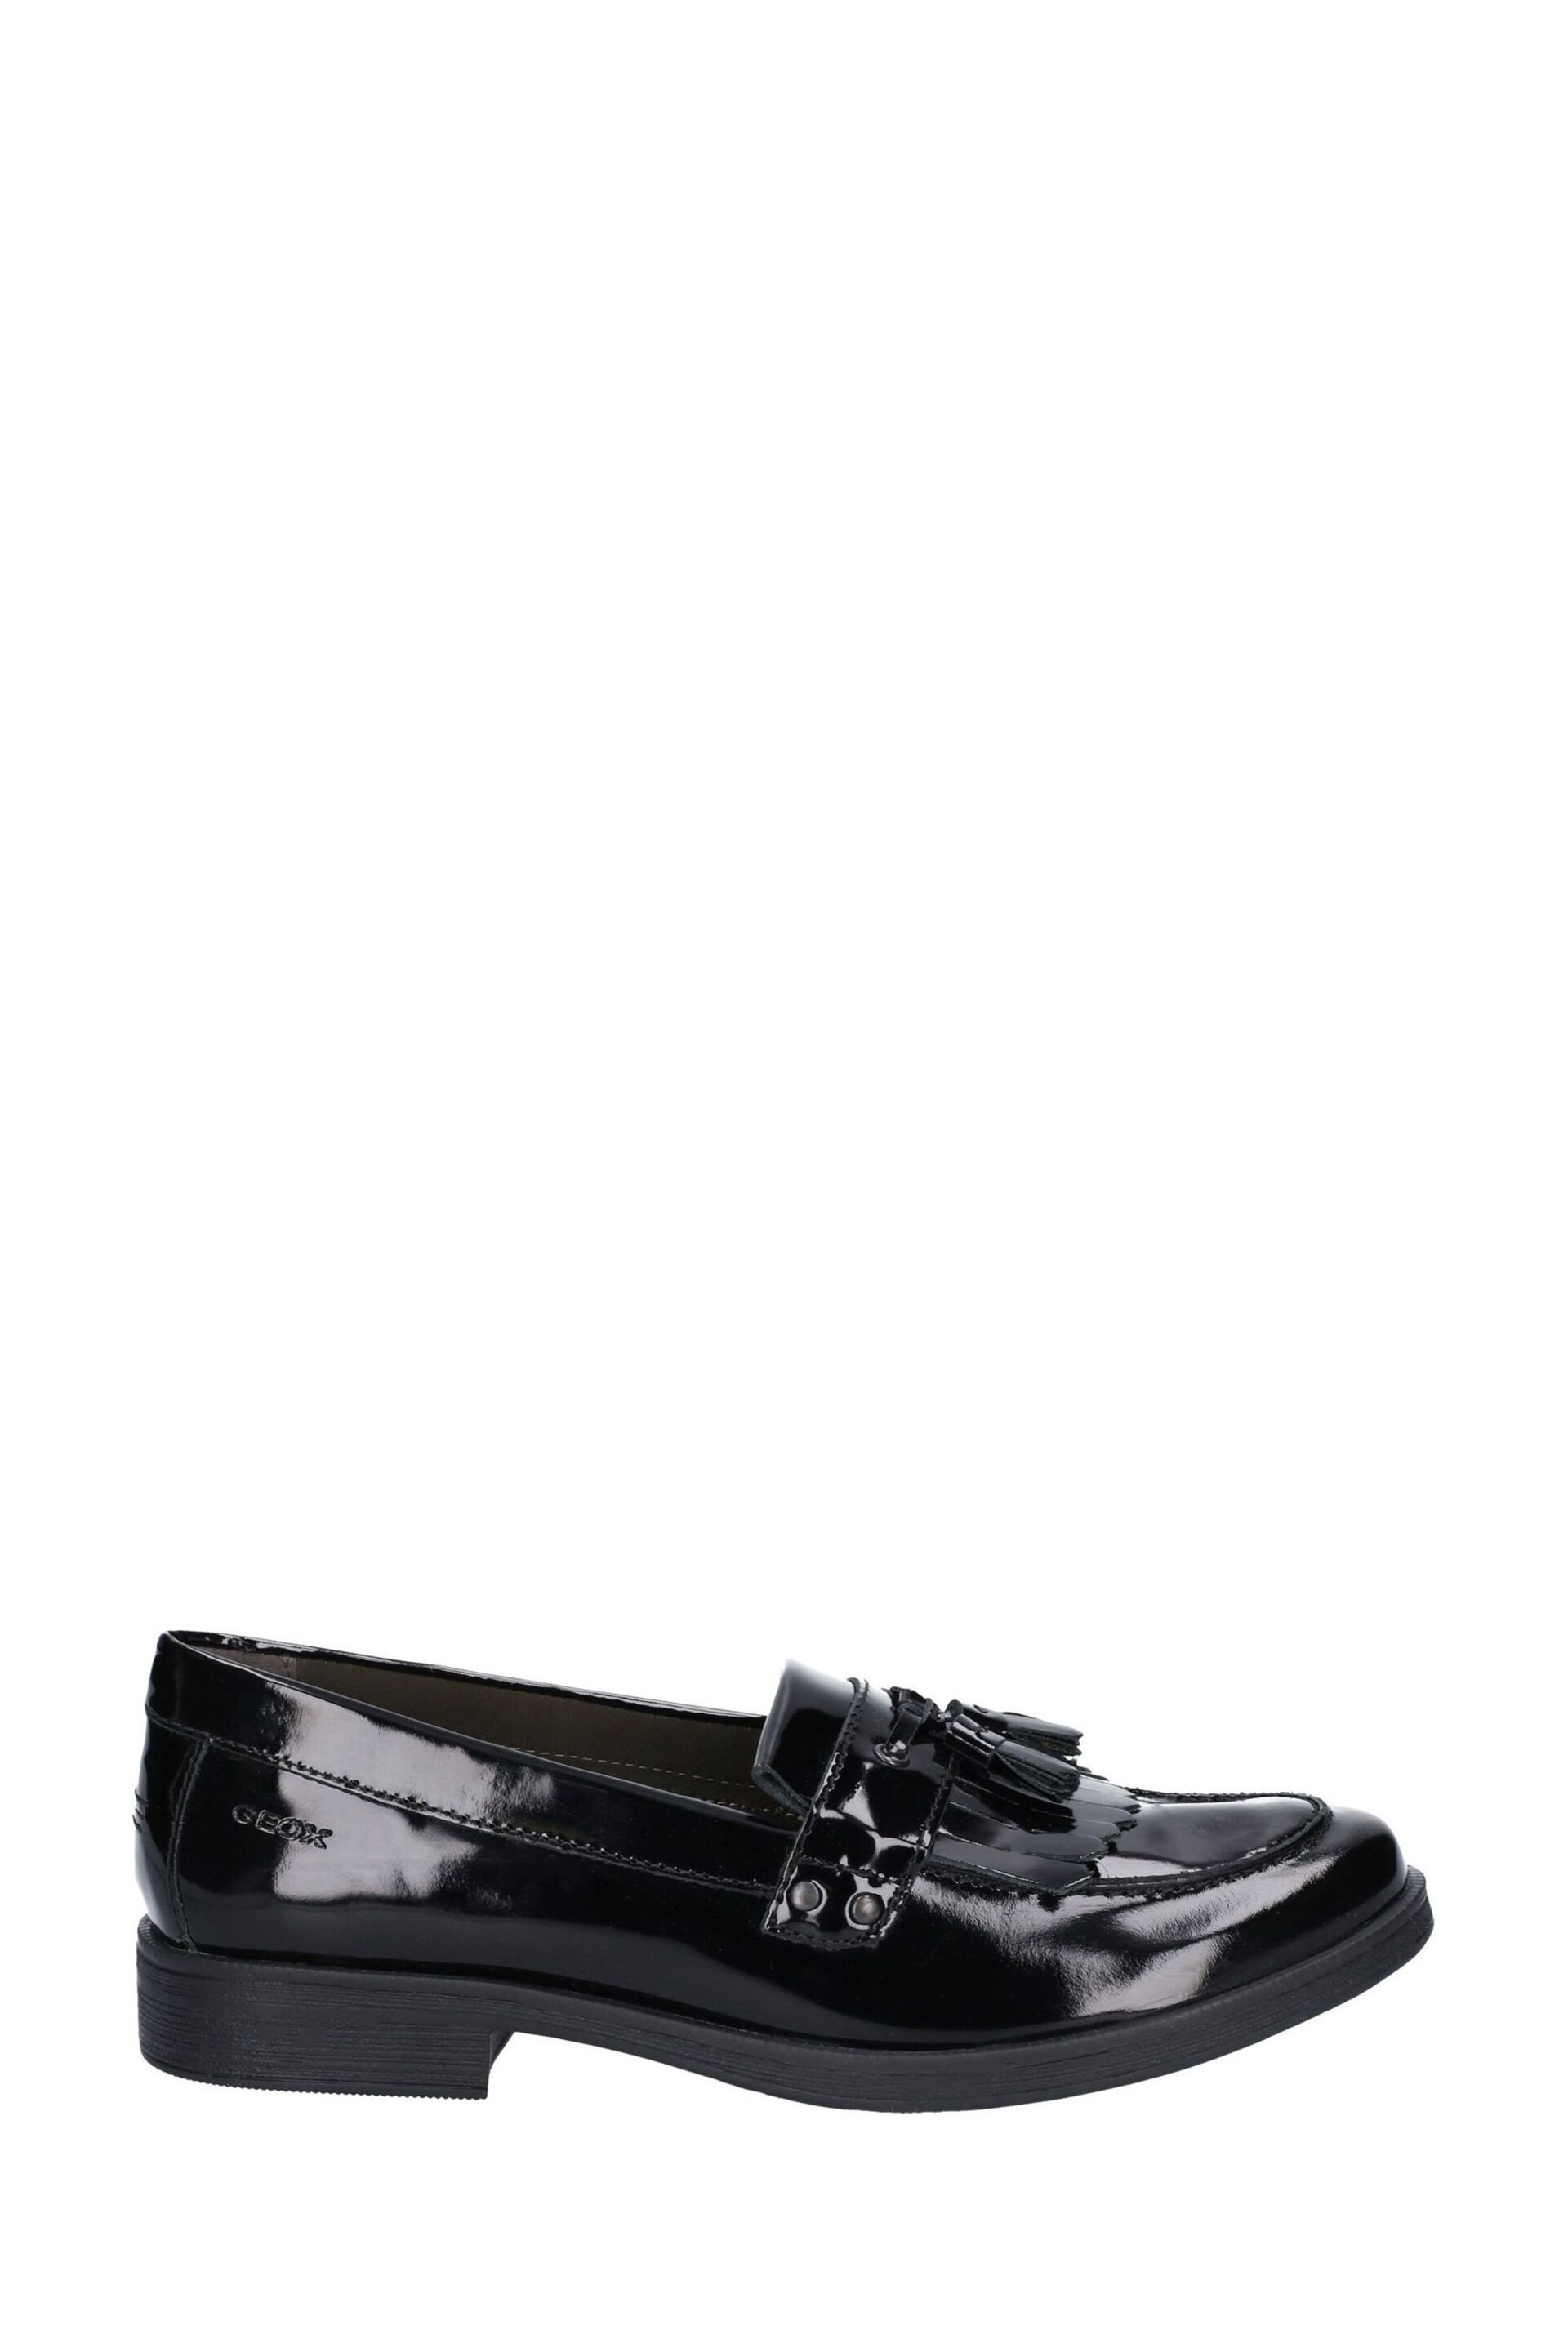 Geox Junior Girl's Agata Black Shoes - Image 4 of 4